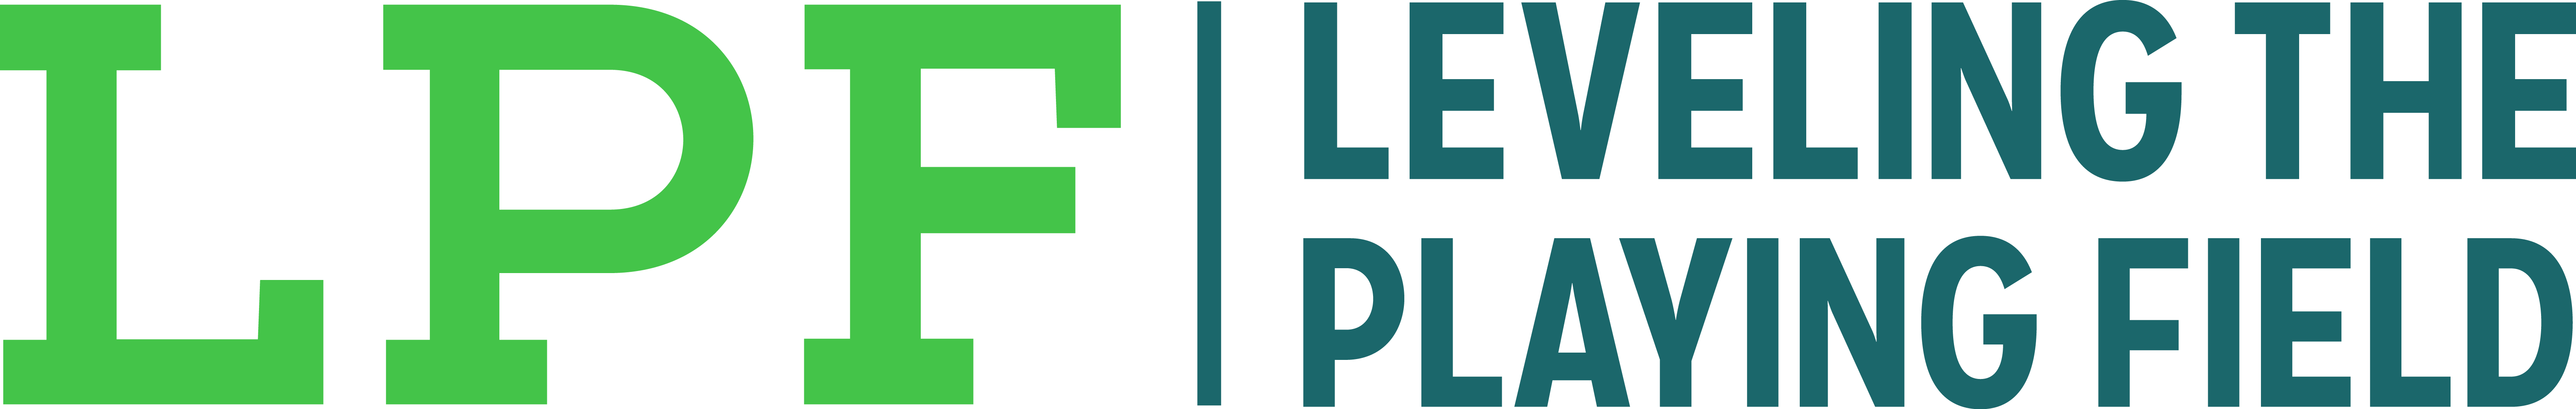 leveling the playing field logo